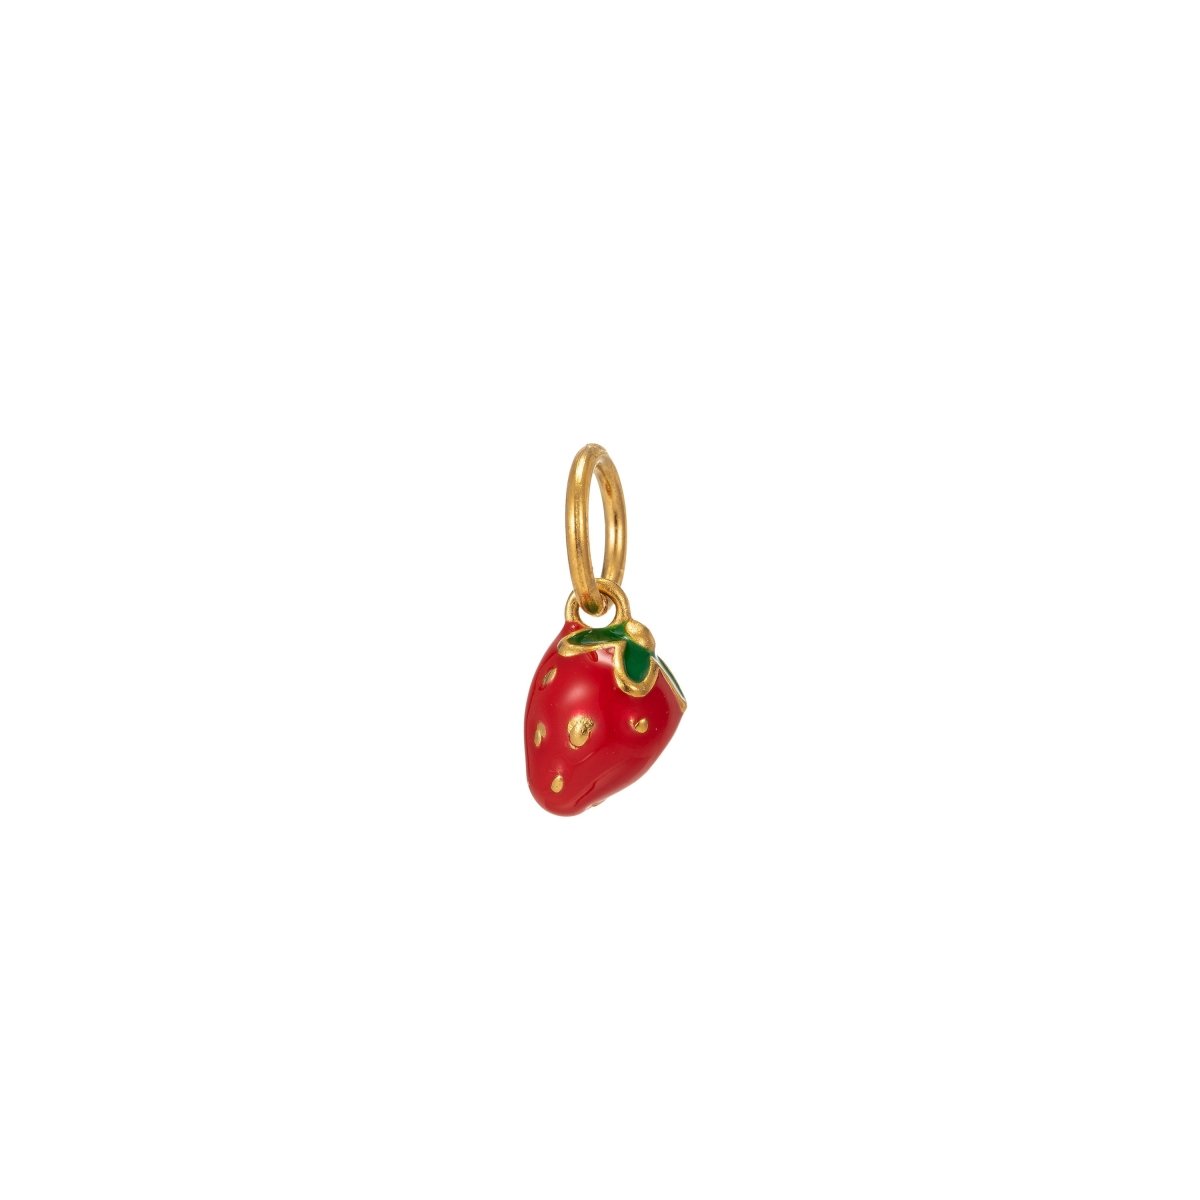 Tiny Gold Strawberry Charm for Kids Girl Teen Woman Jewelry Making Supply Necklace Bracelet Earring Charm Componnent 15x6mm C-633 - DLUXCA